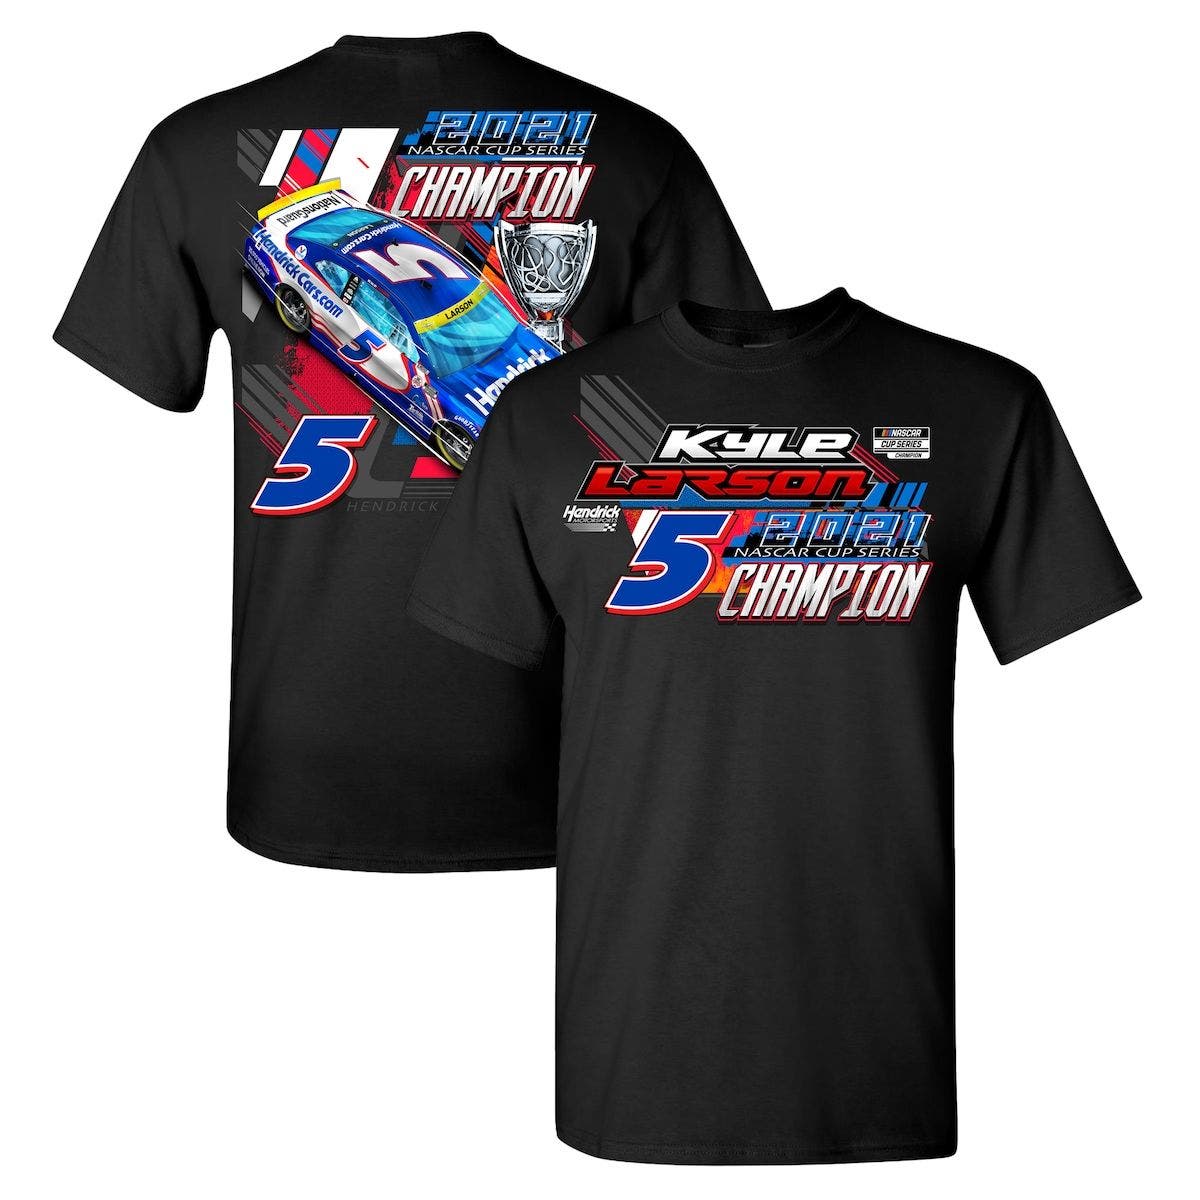 HENDRICK MOTORSPORTS TEAM COLLECTION Men's Hendrick Motorsports Team Collection Black Kyle Larson 2021 NASCAR Cup Series Champion Car Graphic T-Shirt at Nordstrom